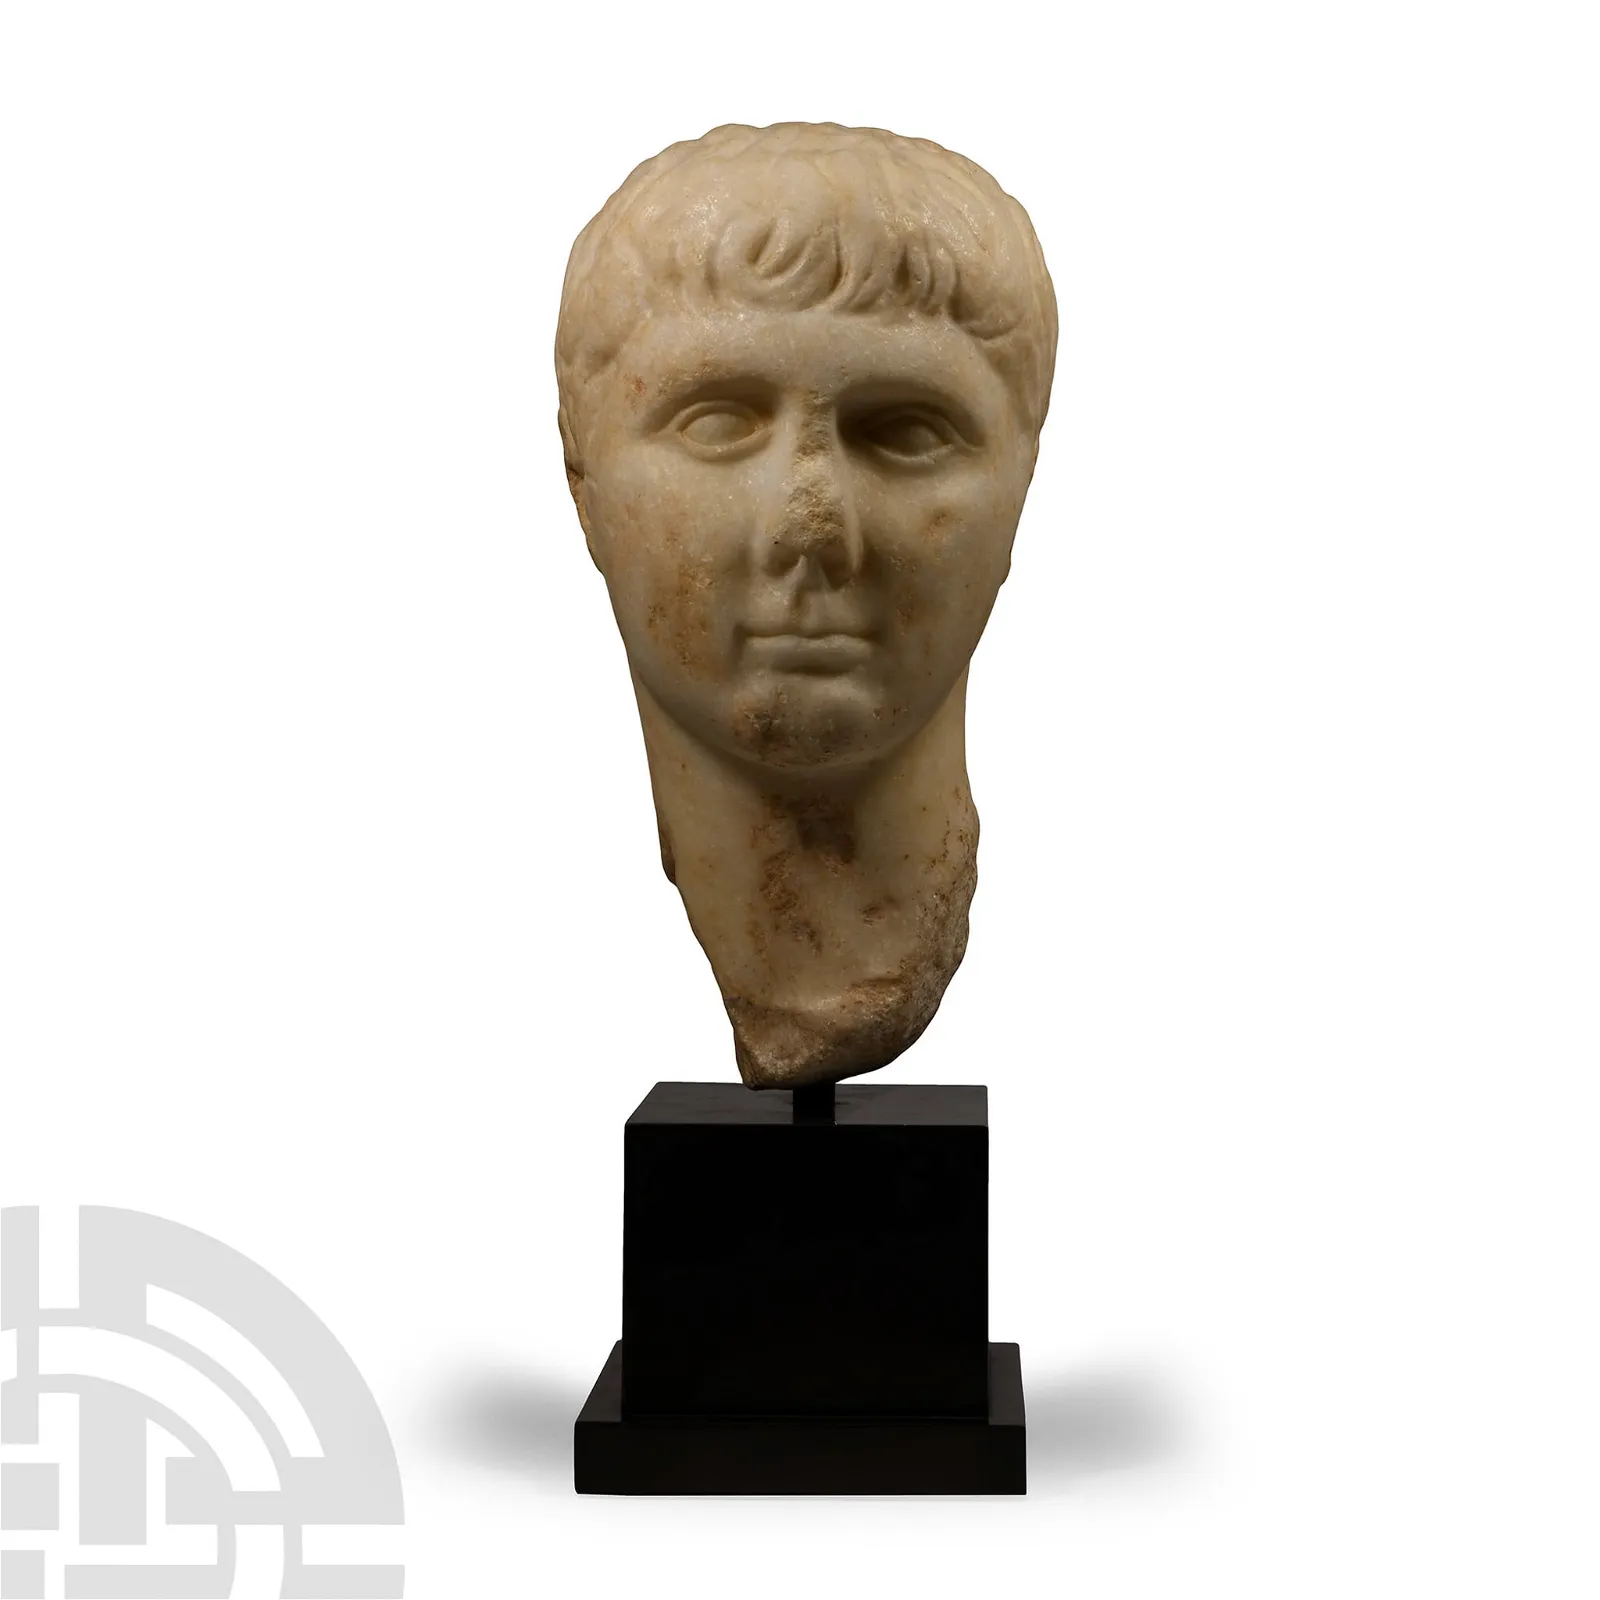 Roman marble portrait head modeled in the round of Gaius Caesar Vipsanianus (20 B.C.-4 A.D., born to Julia, daughter of Augustus Caesar, and the emperor’s advisor Marcus Vipsanius Agrippa; later adopted by Augustus), likely created in 1 A.D. to celebrate Gaius’ consulship. Height: 48cm (19in) inclusive of custom stand. Weight: 17.4kg (38lbs 6oz). Cf. J.M.C. Toynbee, ‘Roman Historical Portraits,’ London, 1978; E. La Rocca, 'Rom als Vorbild für Pompeji: Aspekte der Kolonisierung,' and many European museum publications. Provenance: Acquired on London art market in 1970s by previous owner’s father; Christie’s London, April 25, 2007; London private collection. Includes academic report by Dr Raffaele D’Amato. Estimate: £30,000-£40,000 ($38,220-$50,960)